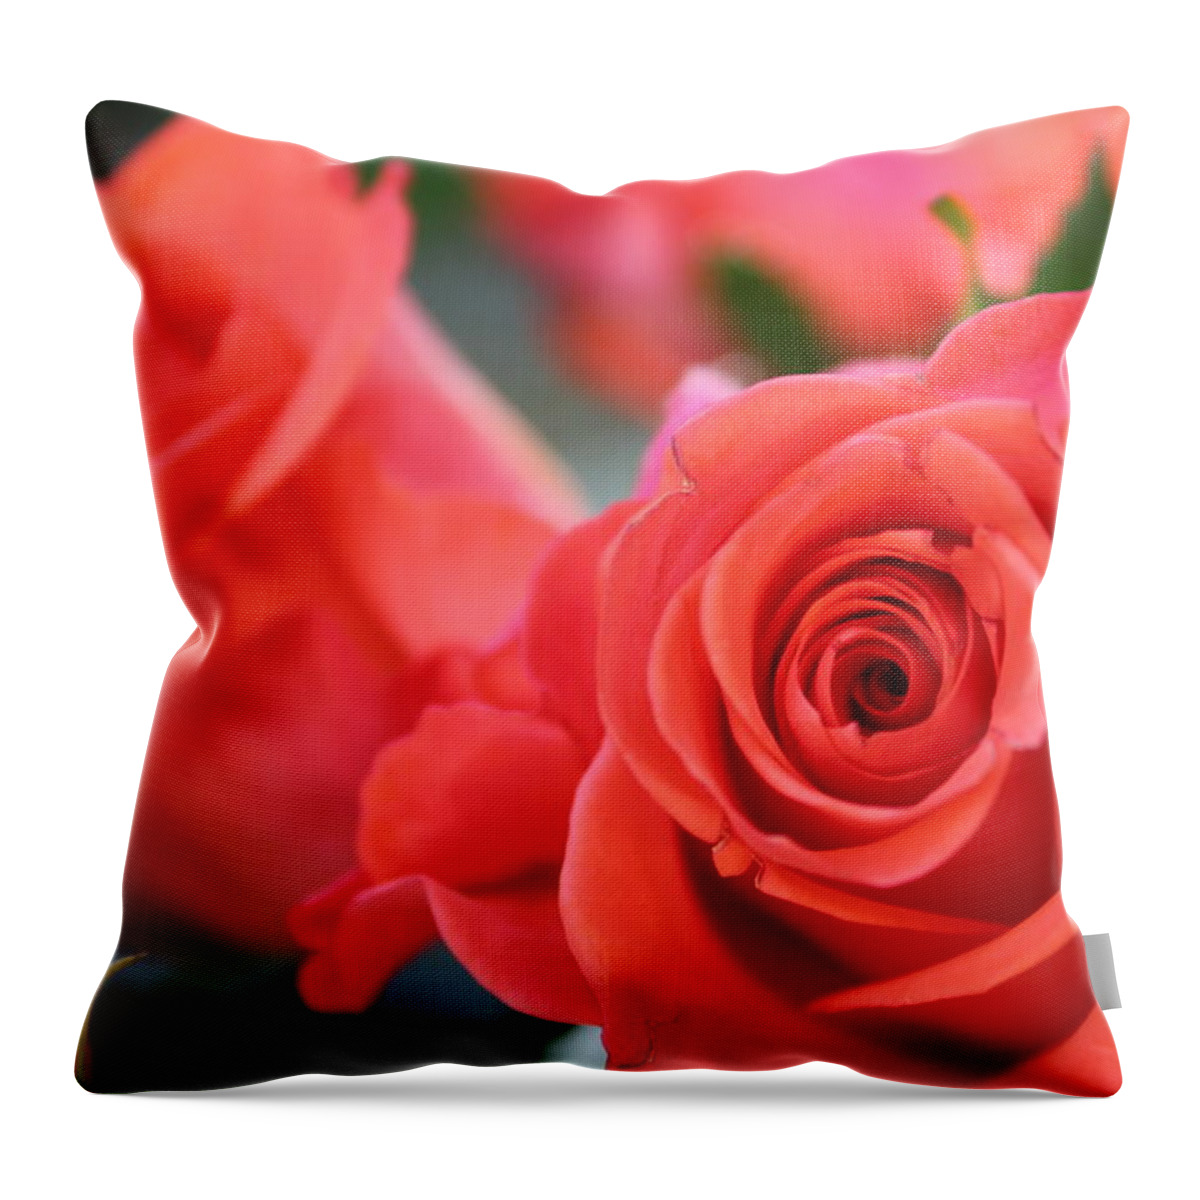 Roses Throw Pillow featuring the photograph Apricot Beauty by Judy Palkimas